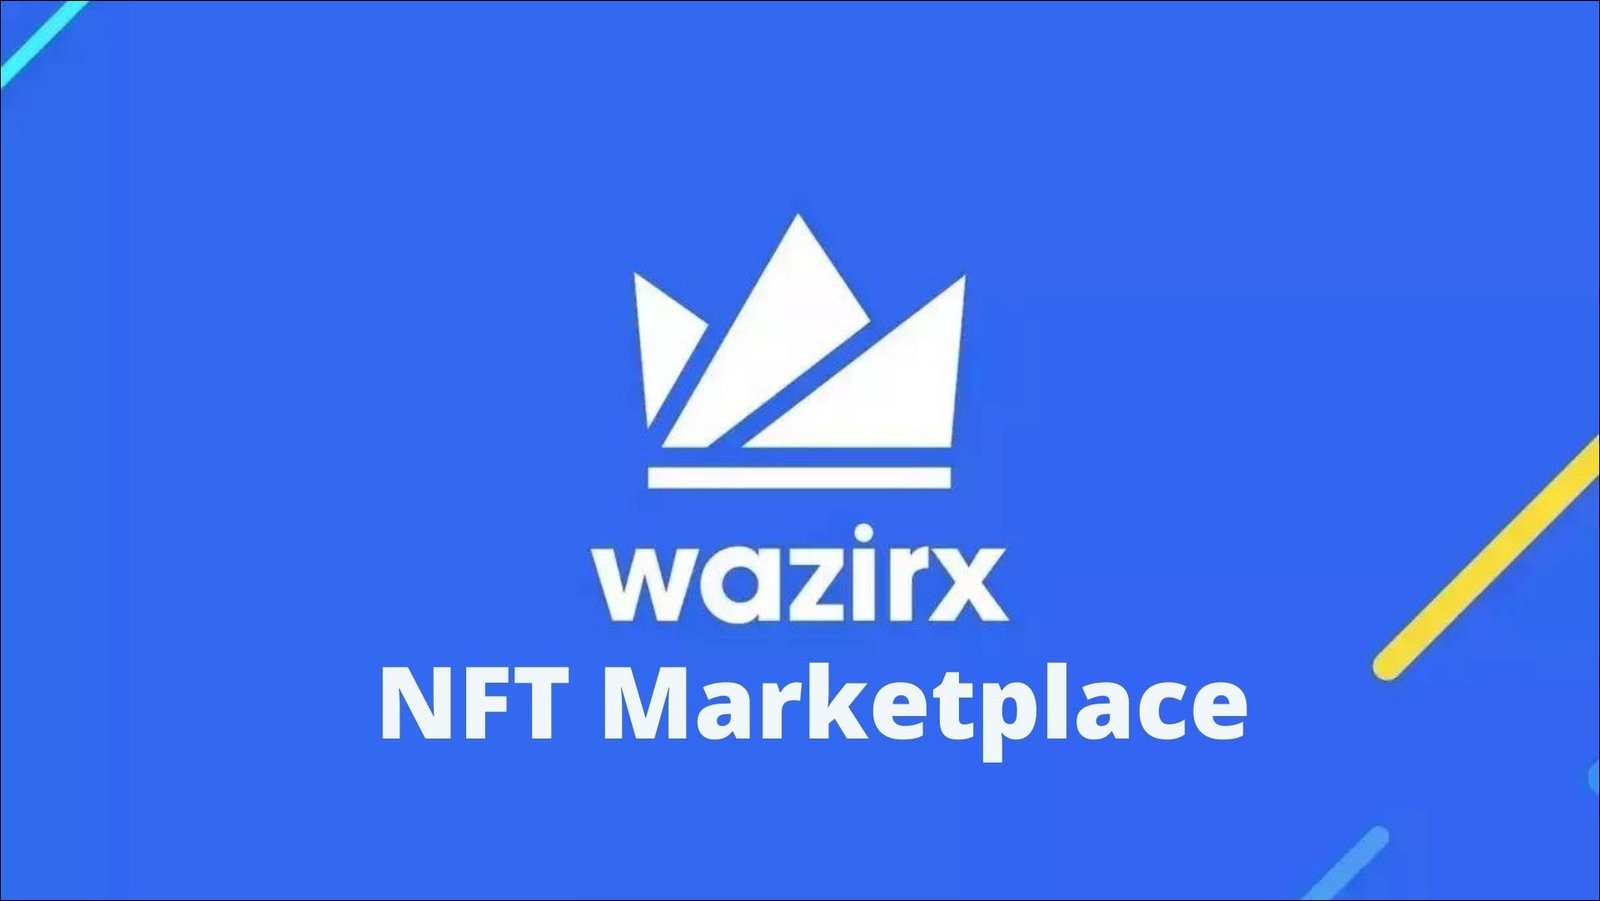 How to make money with the Wazirx NFT marketplace in 2022?